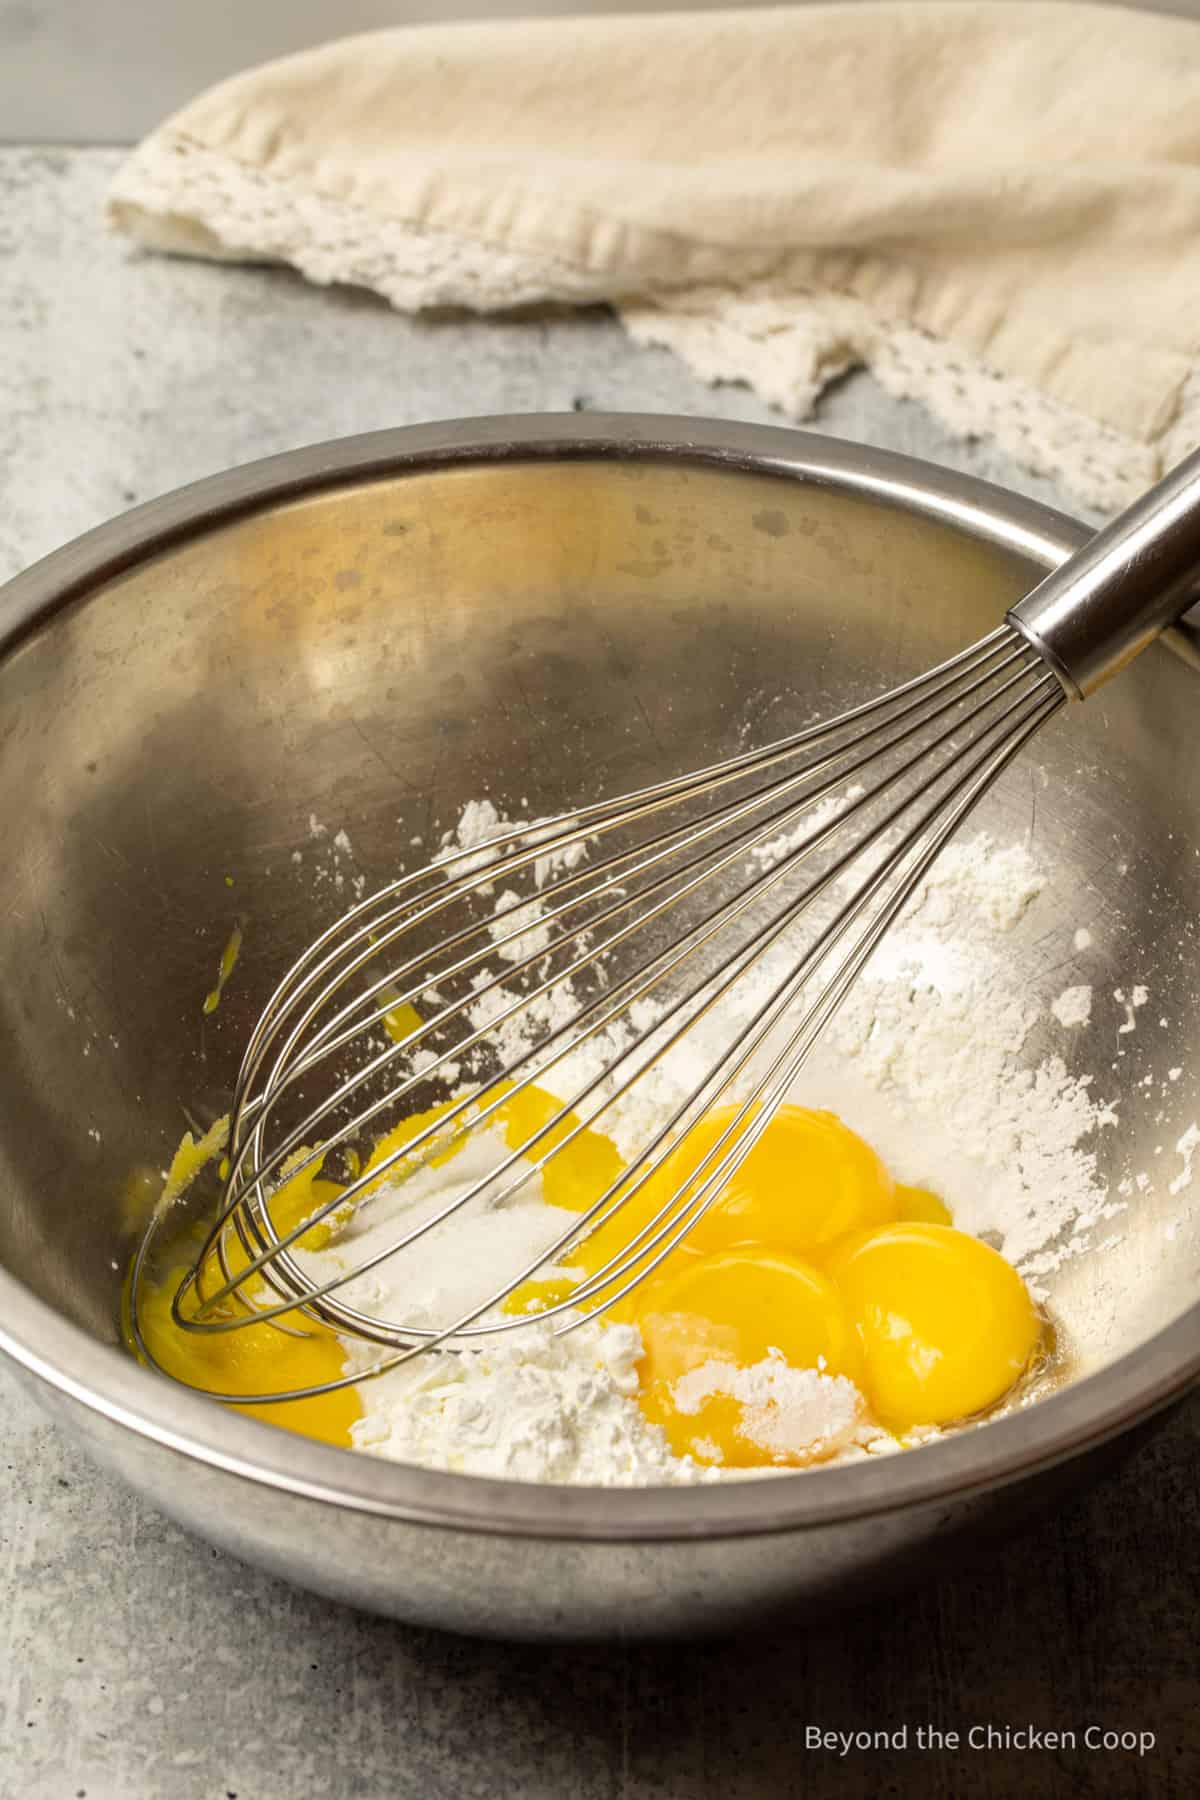 Egg yolks being mixed in a bowl with a whisk.